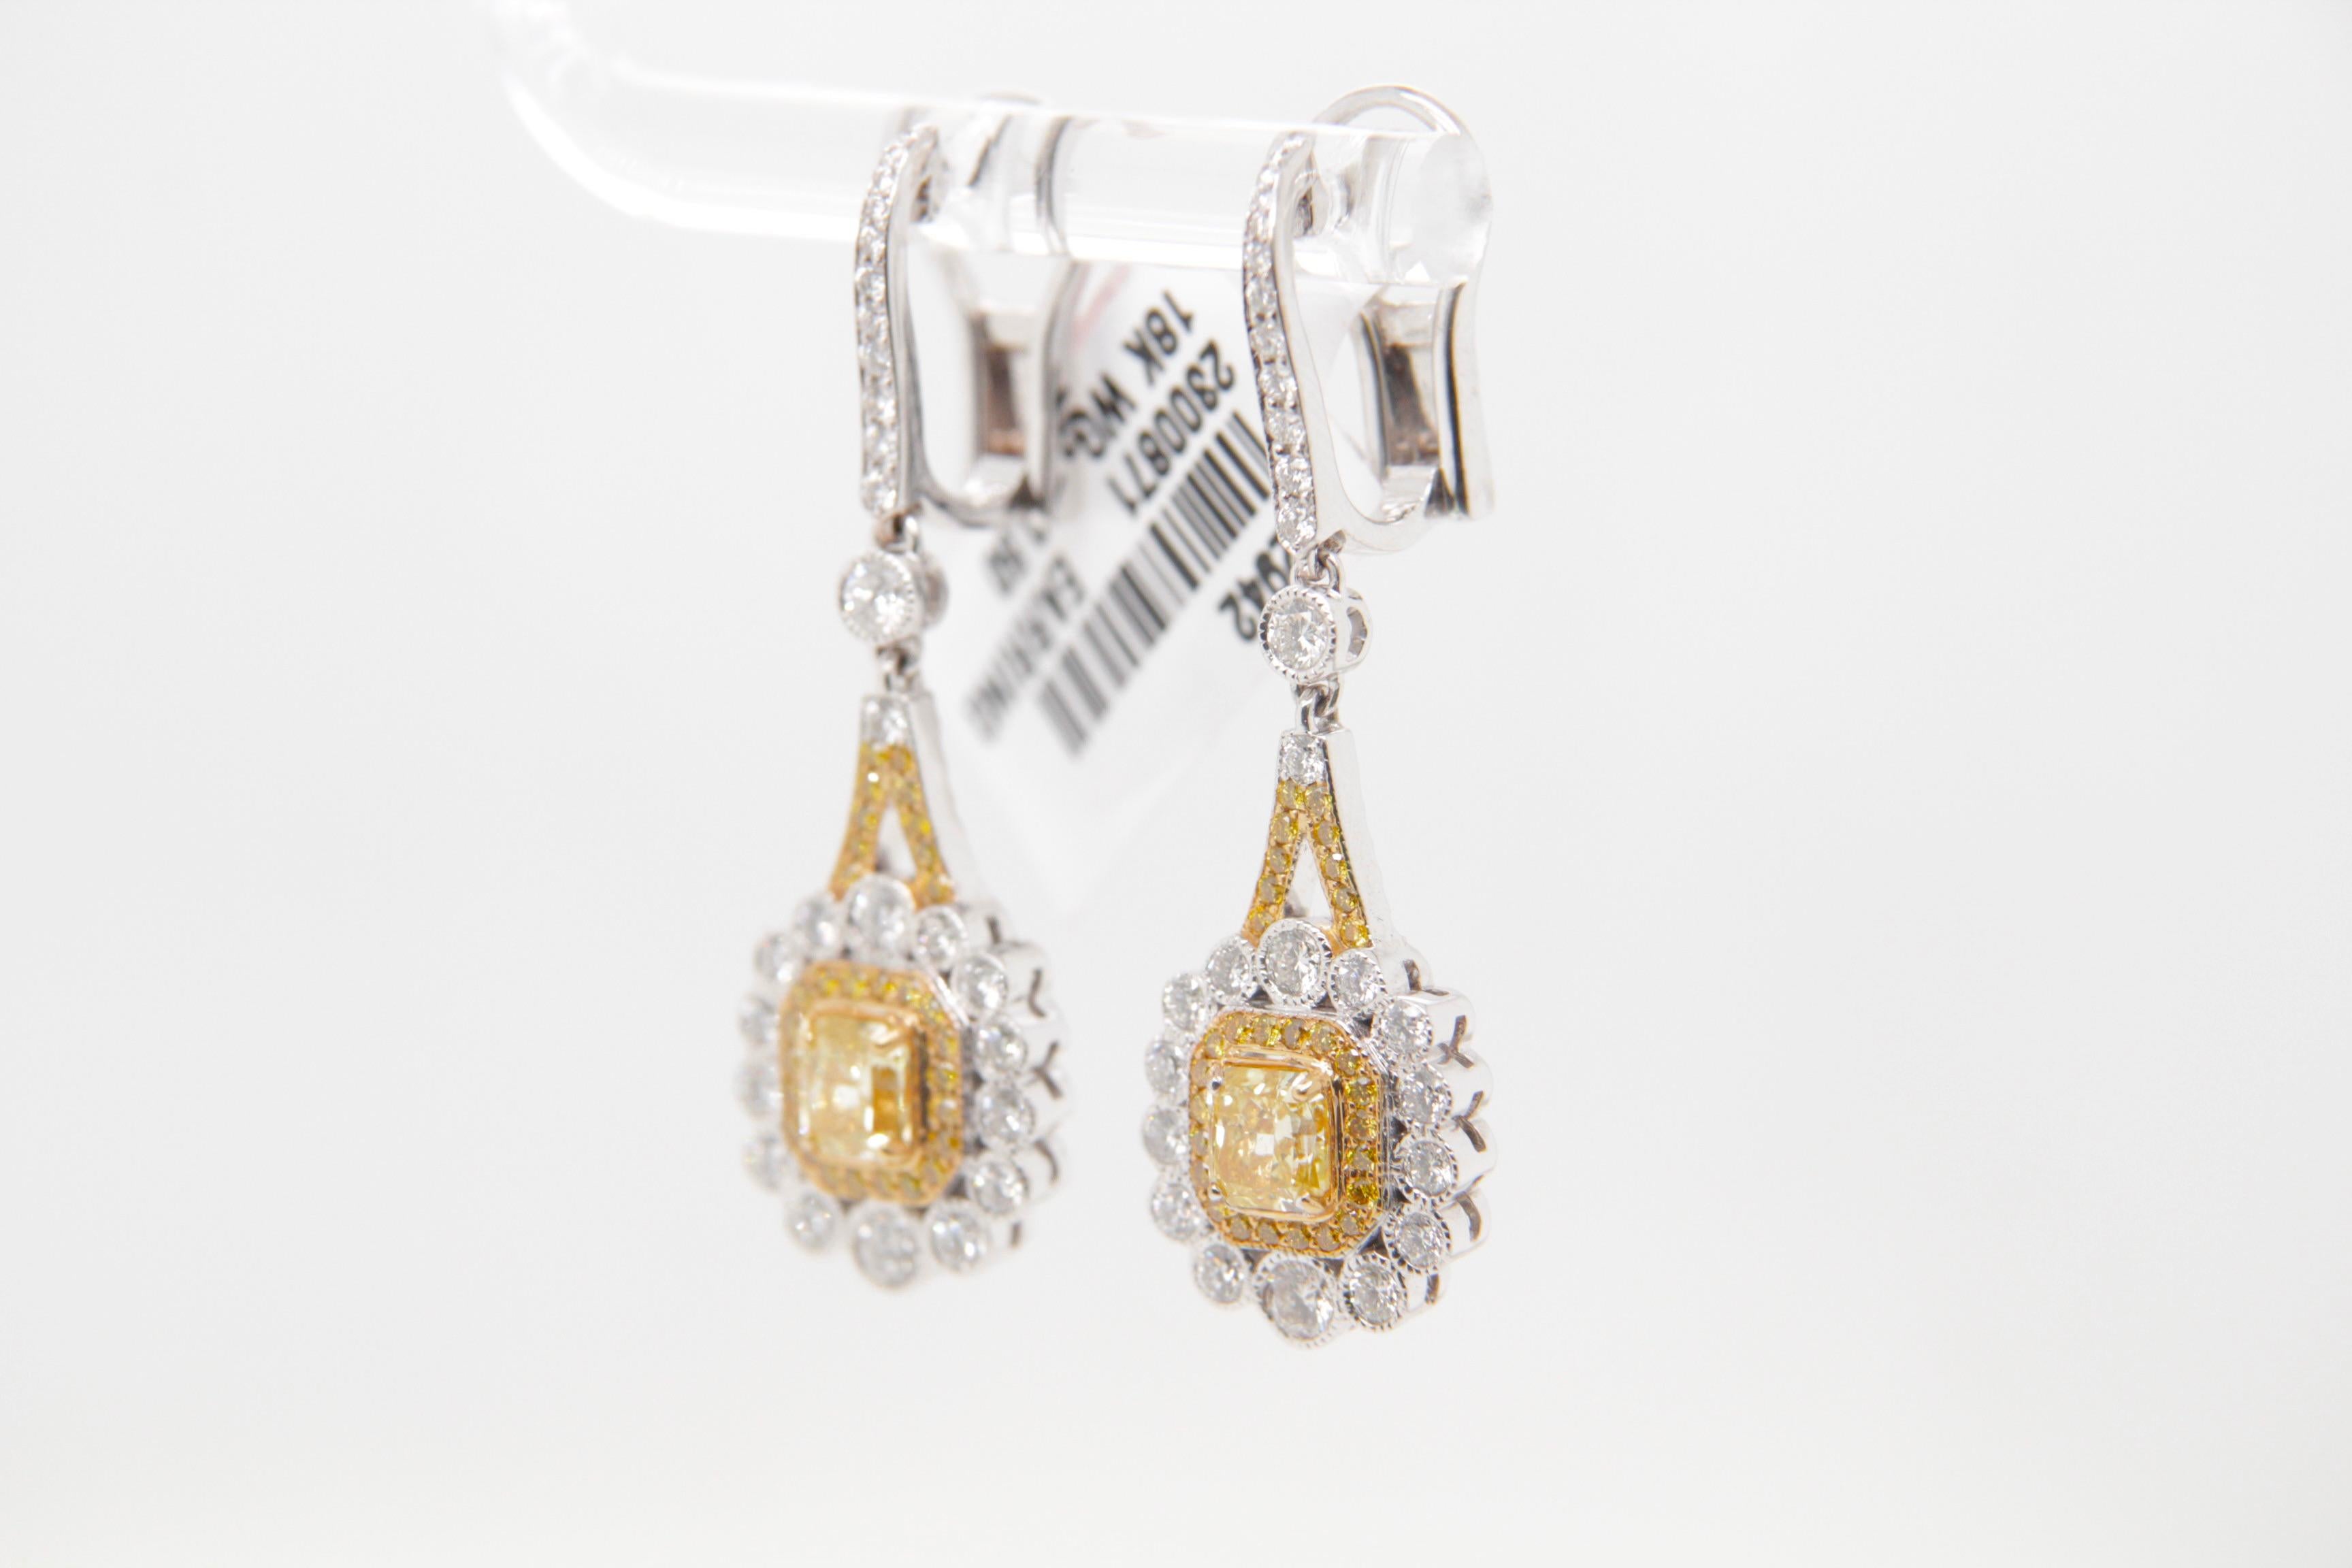 Introducing a captivating creation from Rewa Jewelry, these diamond earrings are a harmonious blend of sophistication and allure, exemplifying the brand's dedication to exquisite craftsmanship and timeless design.

At the heart of these earrings are